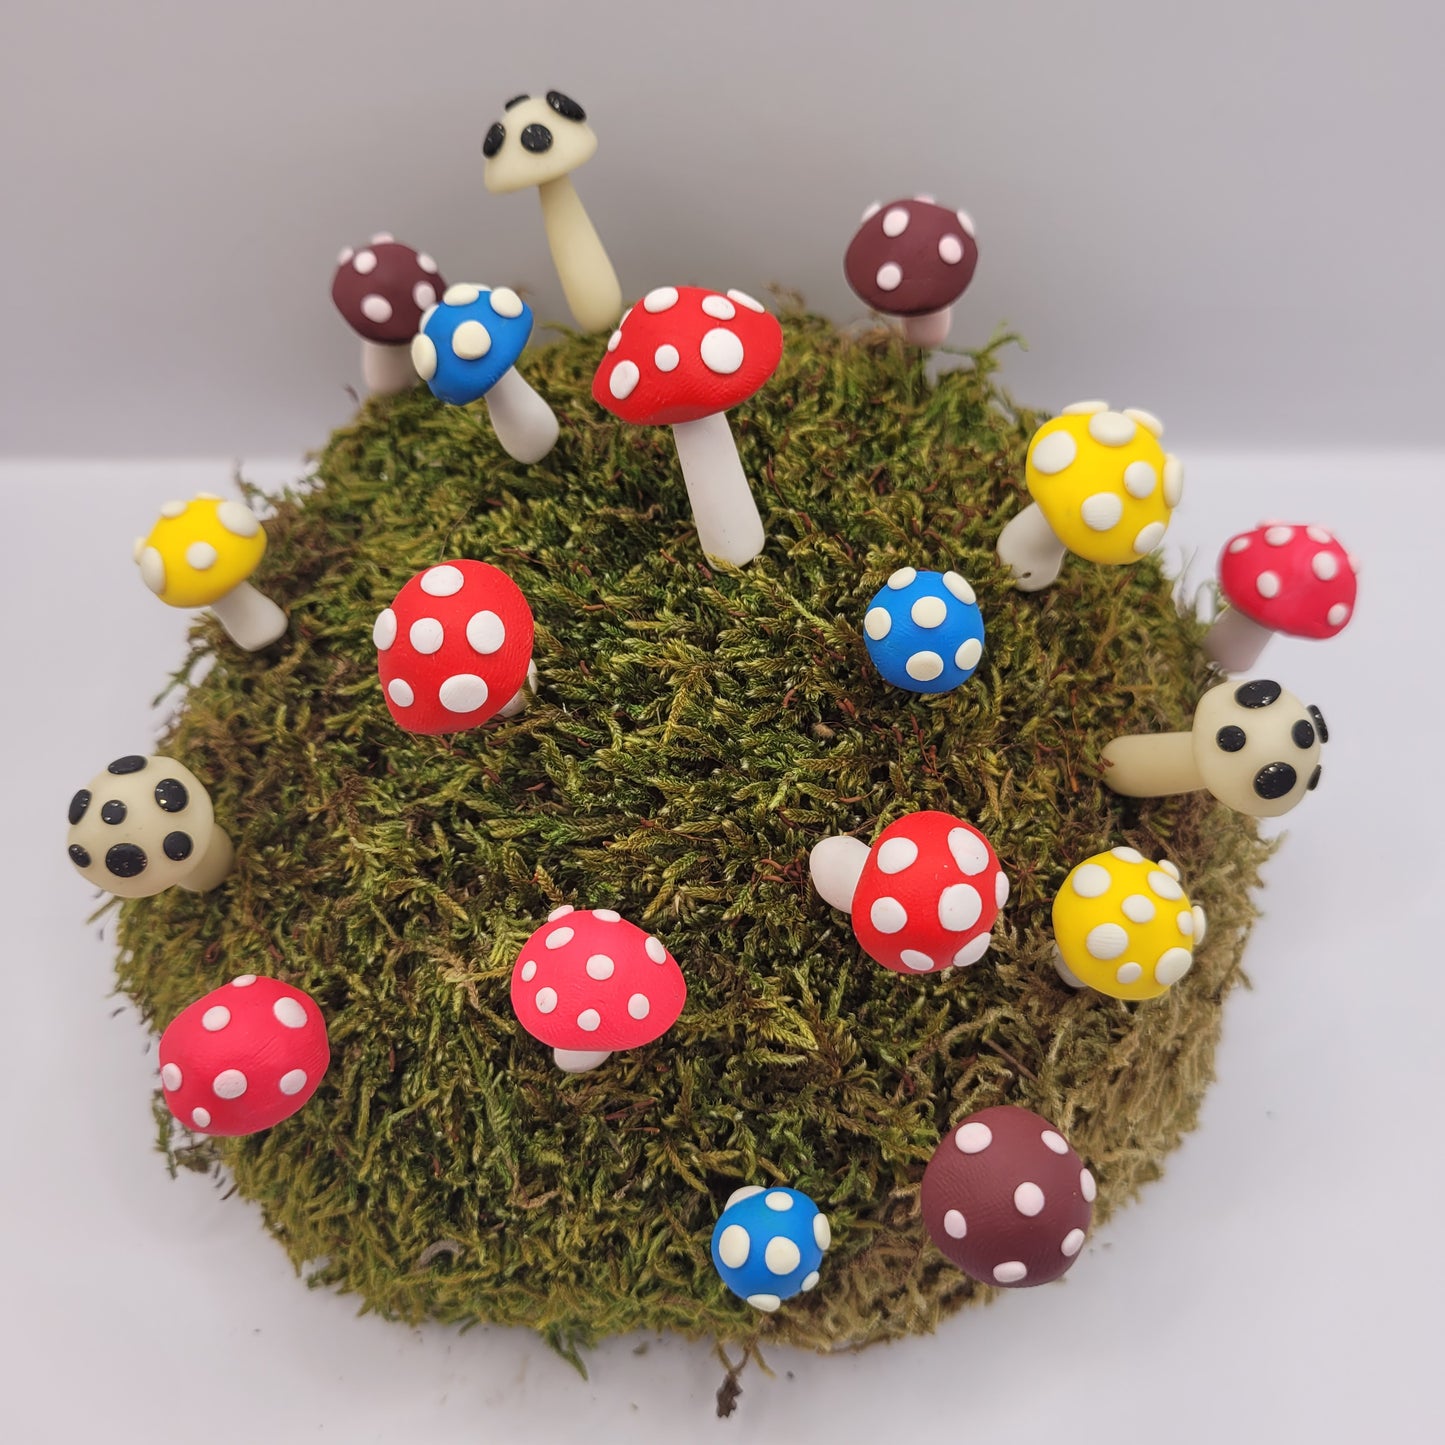 Many small mushrooms in assorted colours stand on a preserved moss hill against a white background.